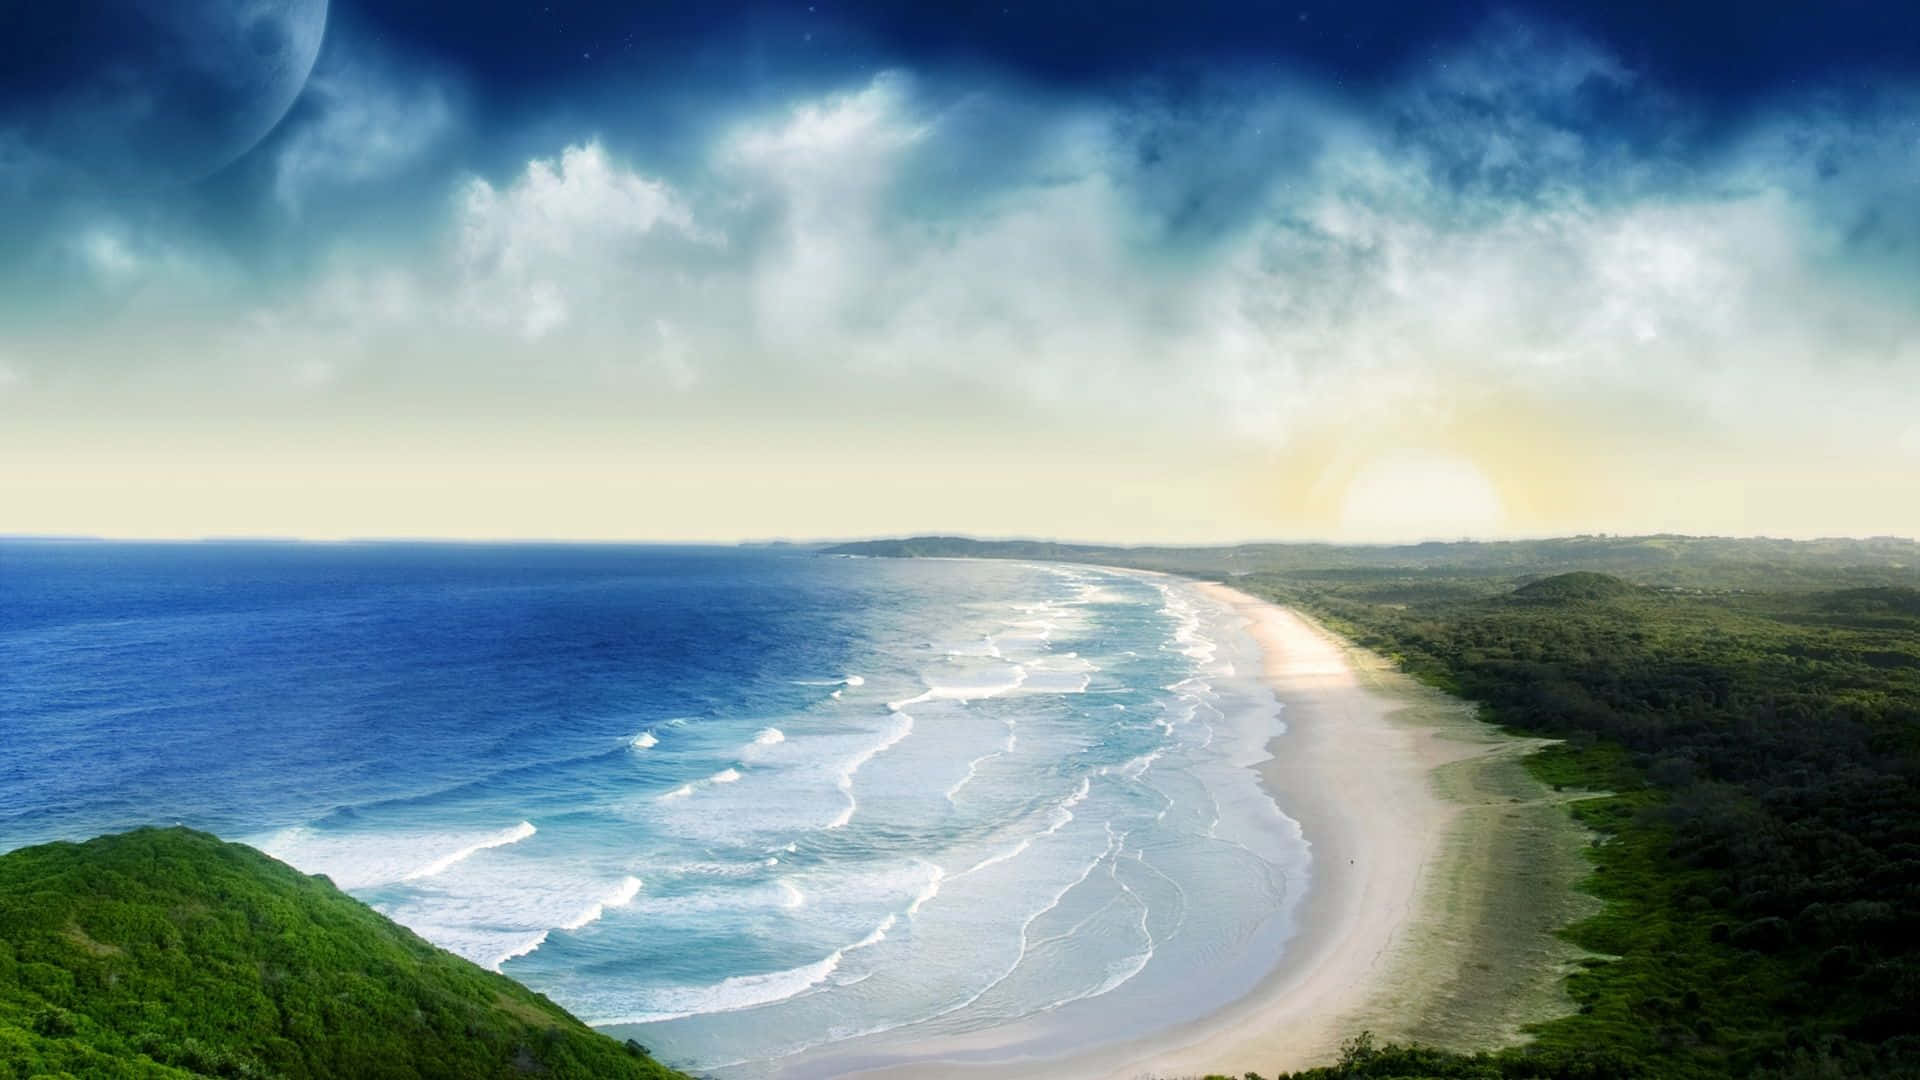 Wide Ocean From A Cliff As A Panoramic Desktop Wallpaper